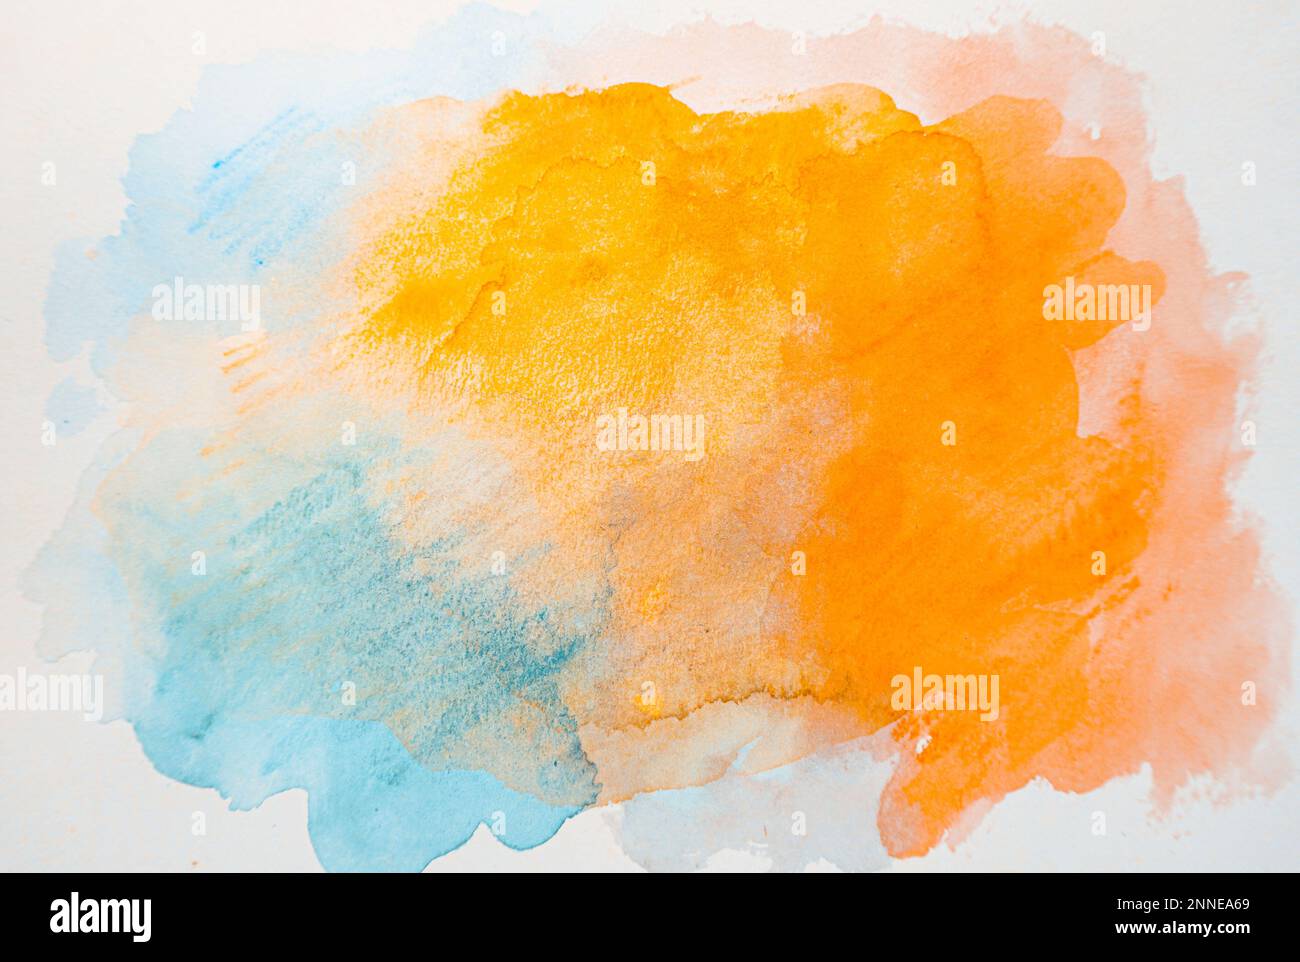 Abstract orange, yellow and blue colorful watercolor on white background, Colorful watercolor splashing on the paper, Abstract painted illustration de Stock Photo